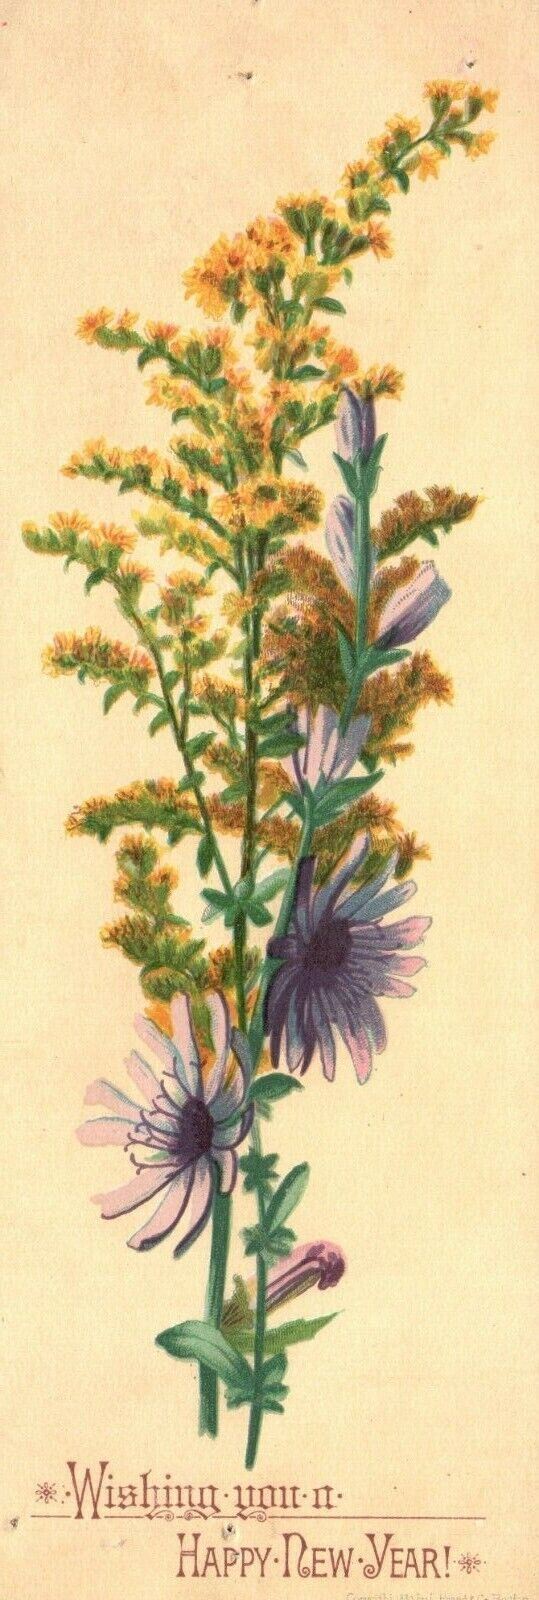 1880s-90s Yellow & Purple Flowers Wishing You A Happy New Year Trade Card